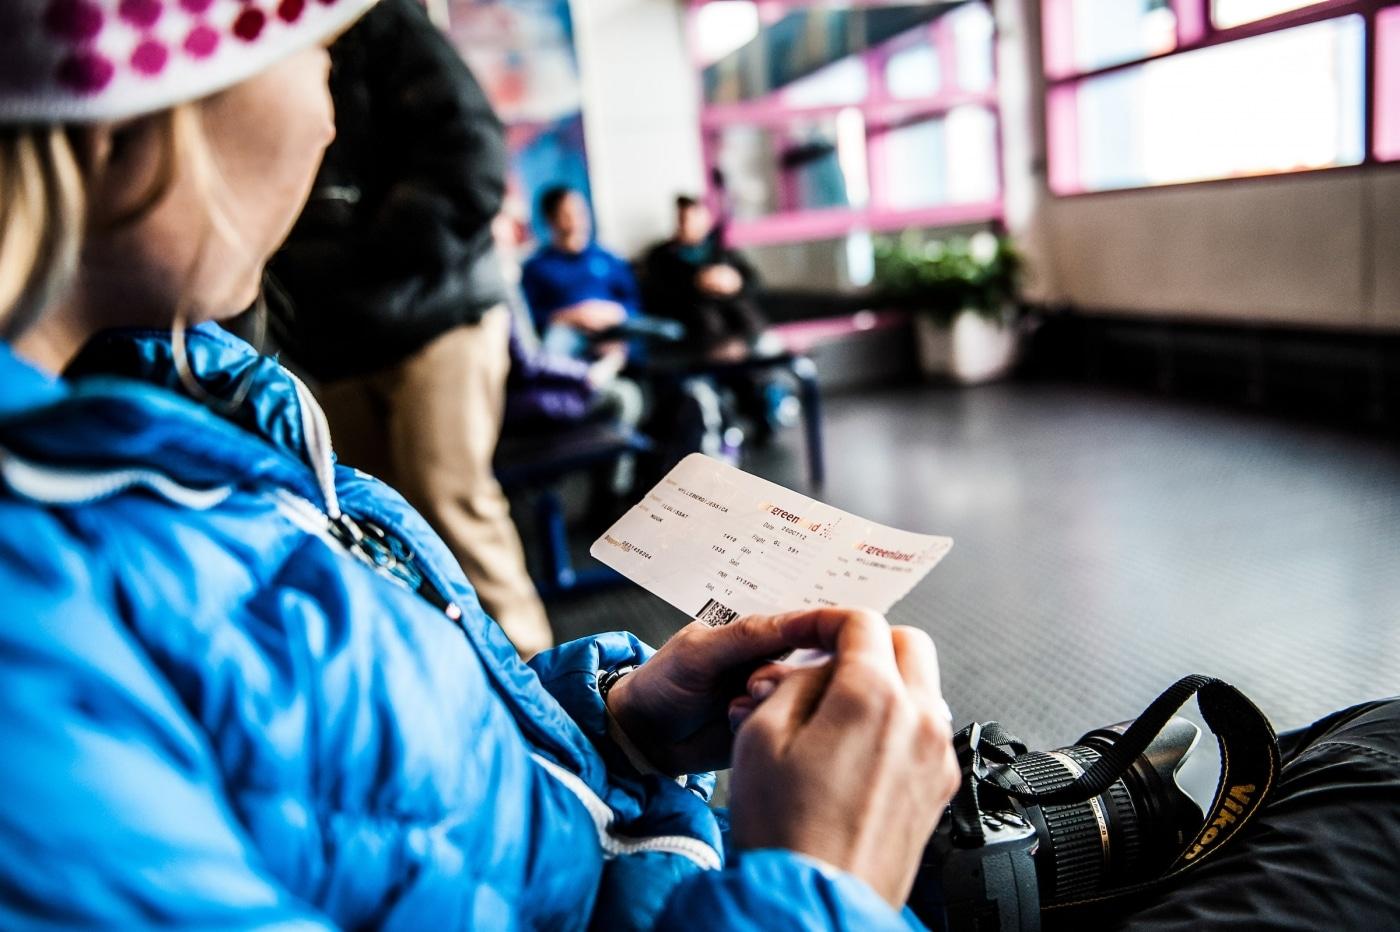 A traveler waiting to board a plane from Ilulissat in Greenland. Photo by Camilla Hylleberg - Visit Greenland